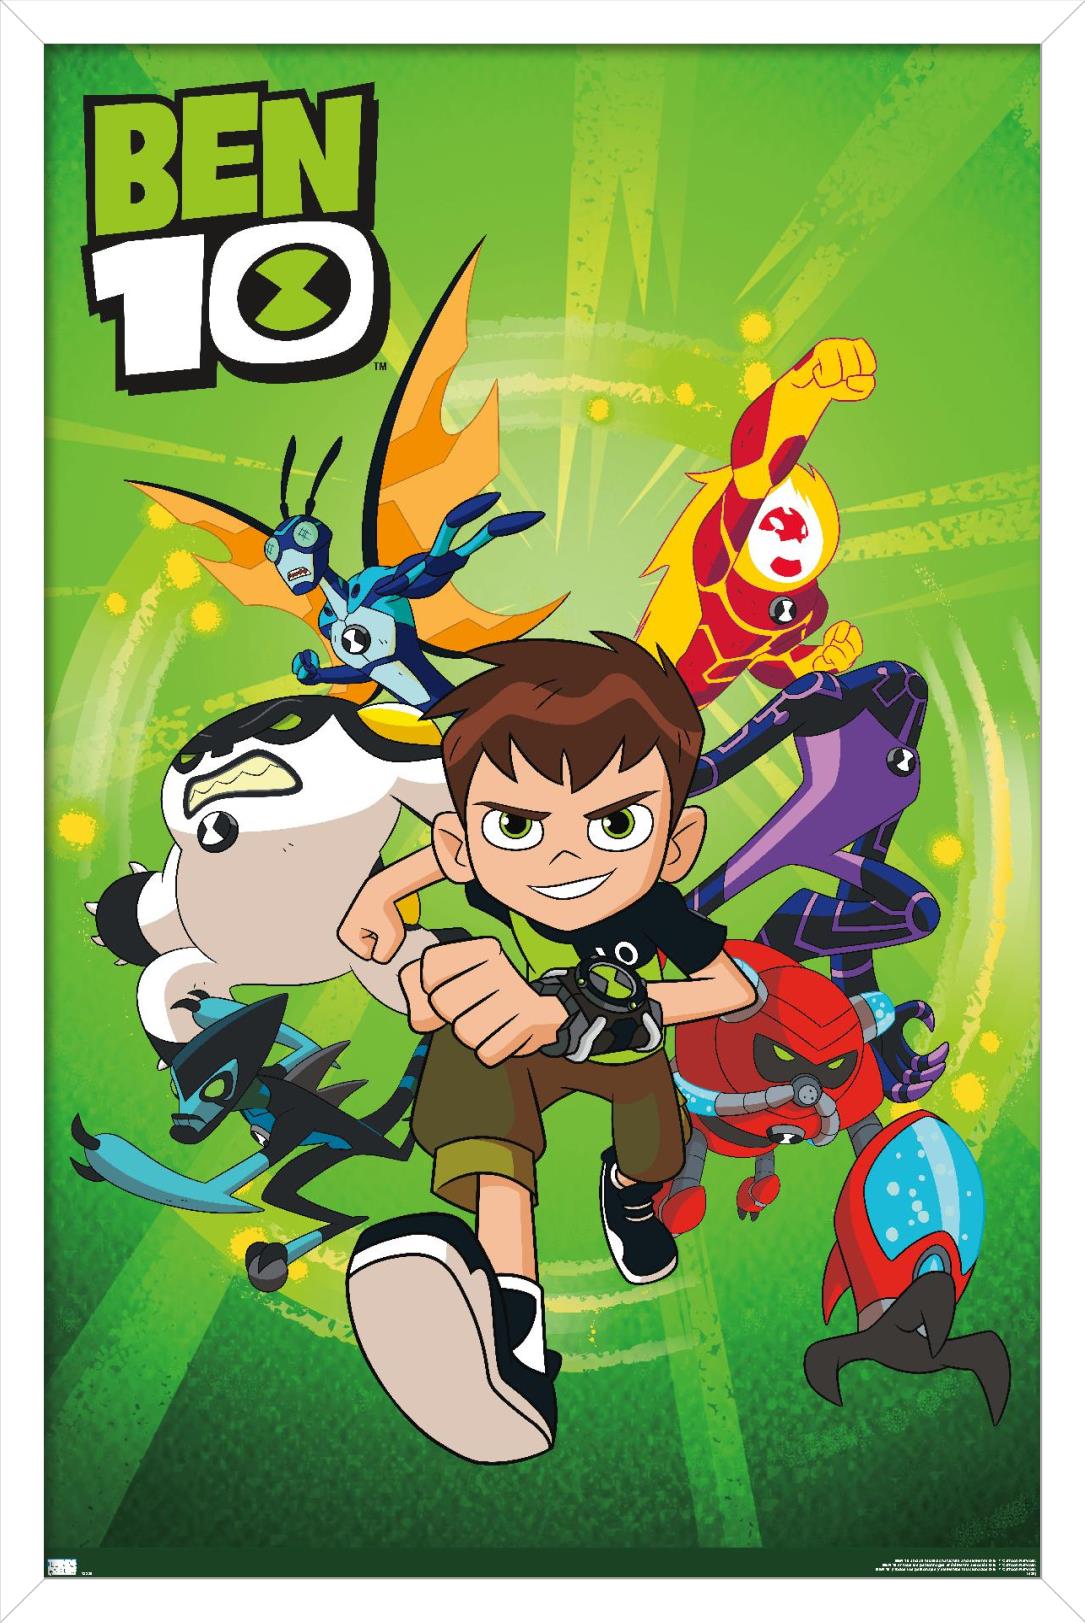 Ben 10 - Group Wall Poster, 22.375" x 34", Framed - image 1 of 5